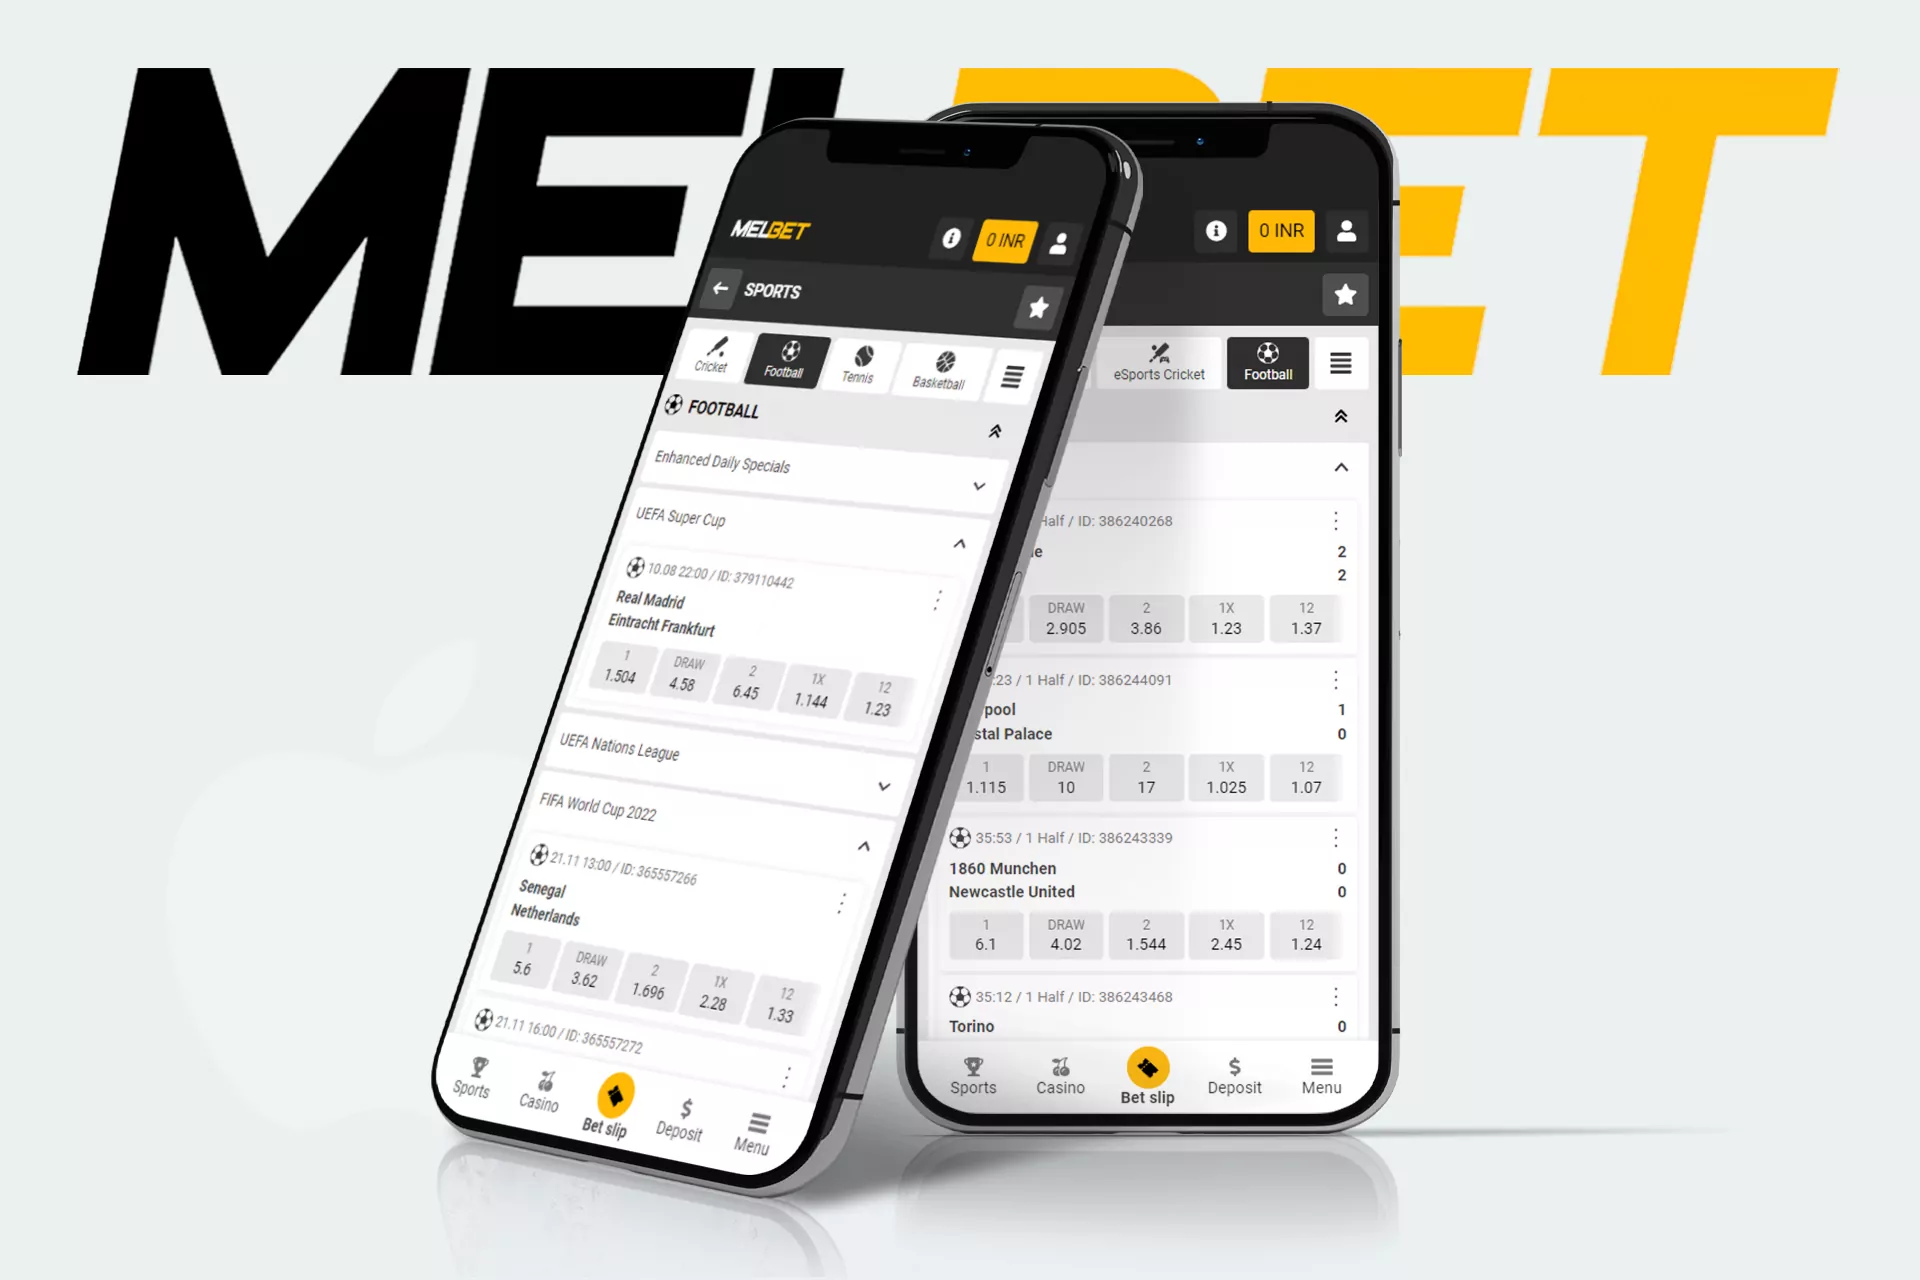 You can also place bets in the app or mobile browser version of Melbet.